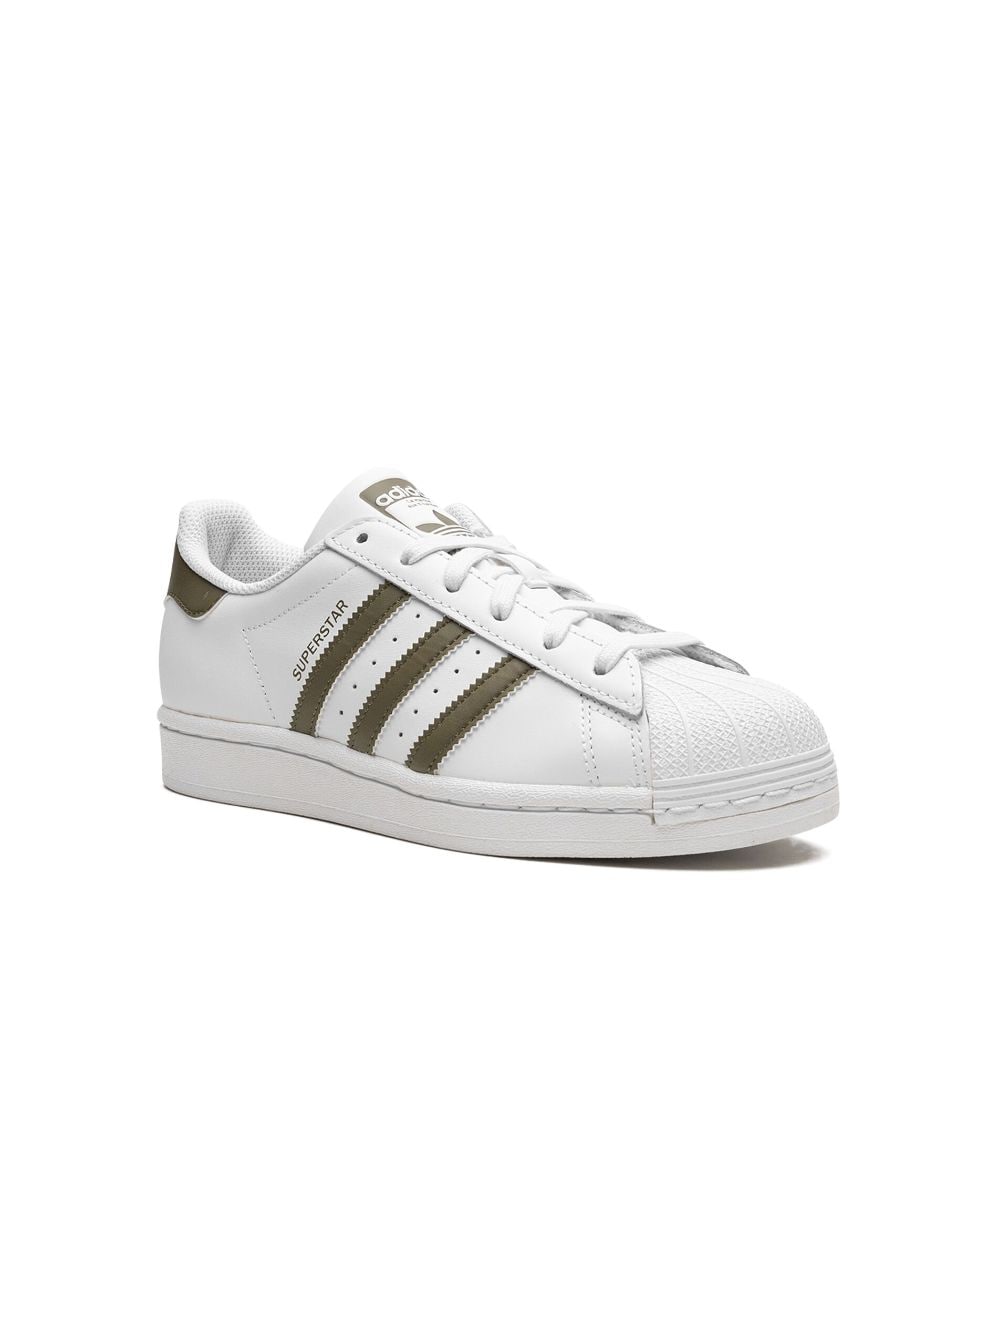 Adidas Originals Kids' Superstar Low-top Trainers In White/olive